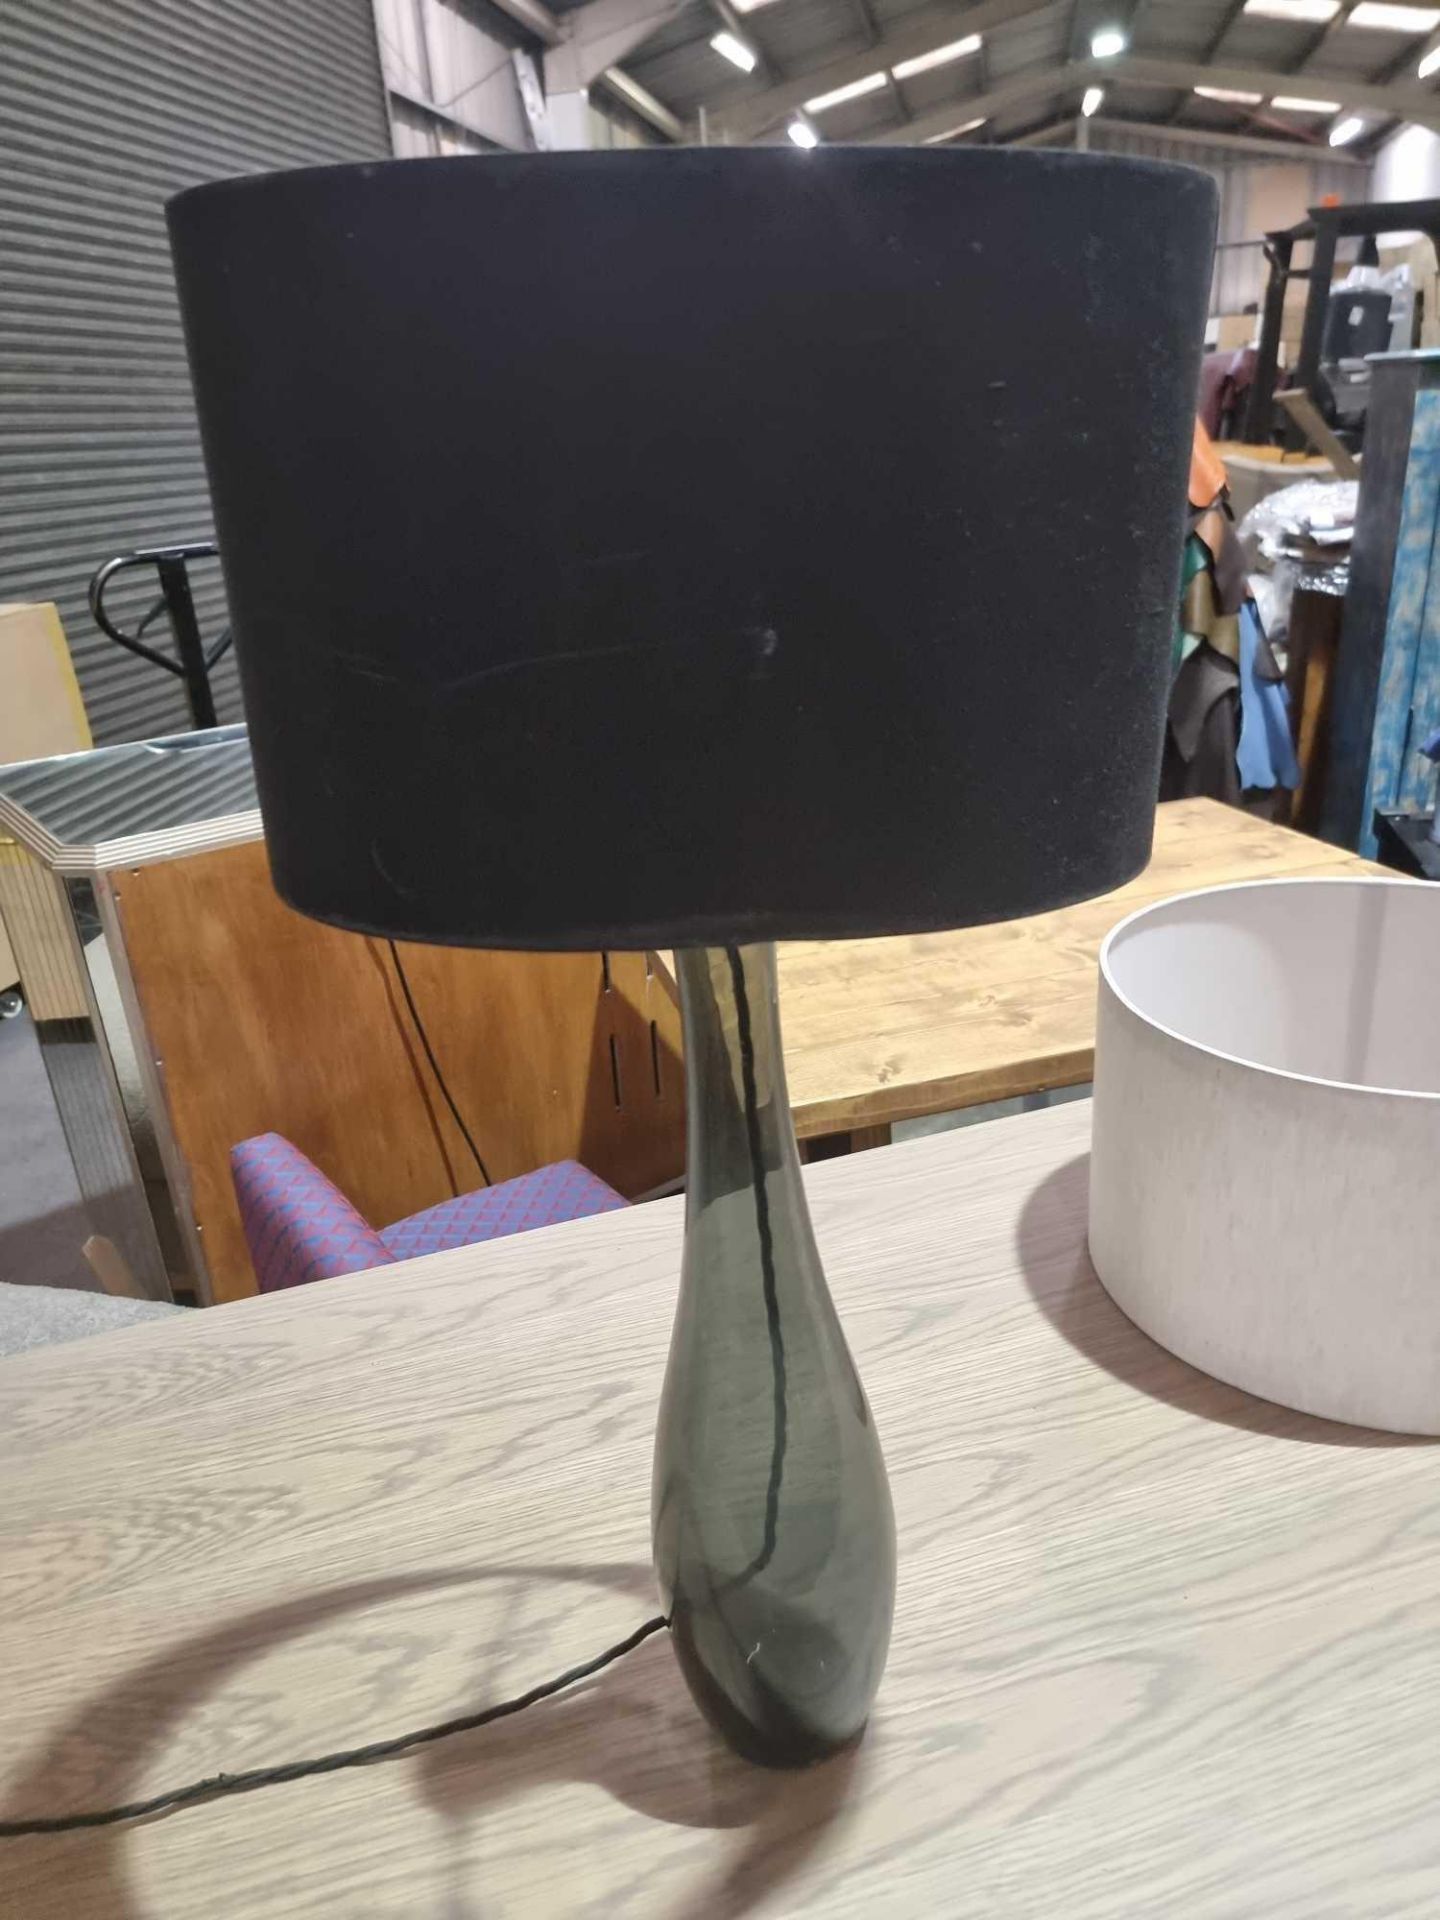 Heathfield And Co Bliss Table Lamp The Table Lamp Perfectly Demonstrates Understated Elegance. The - Image 3 of 3